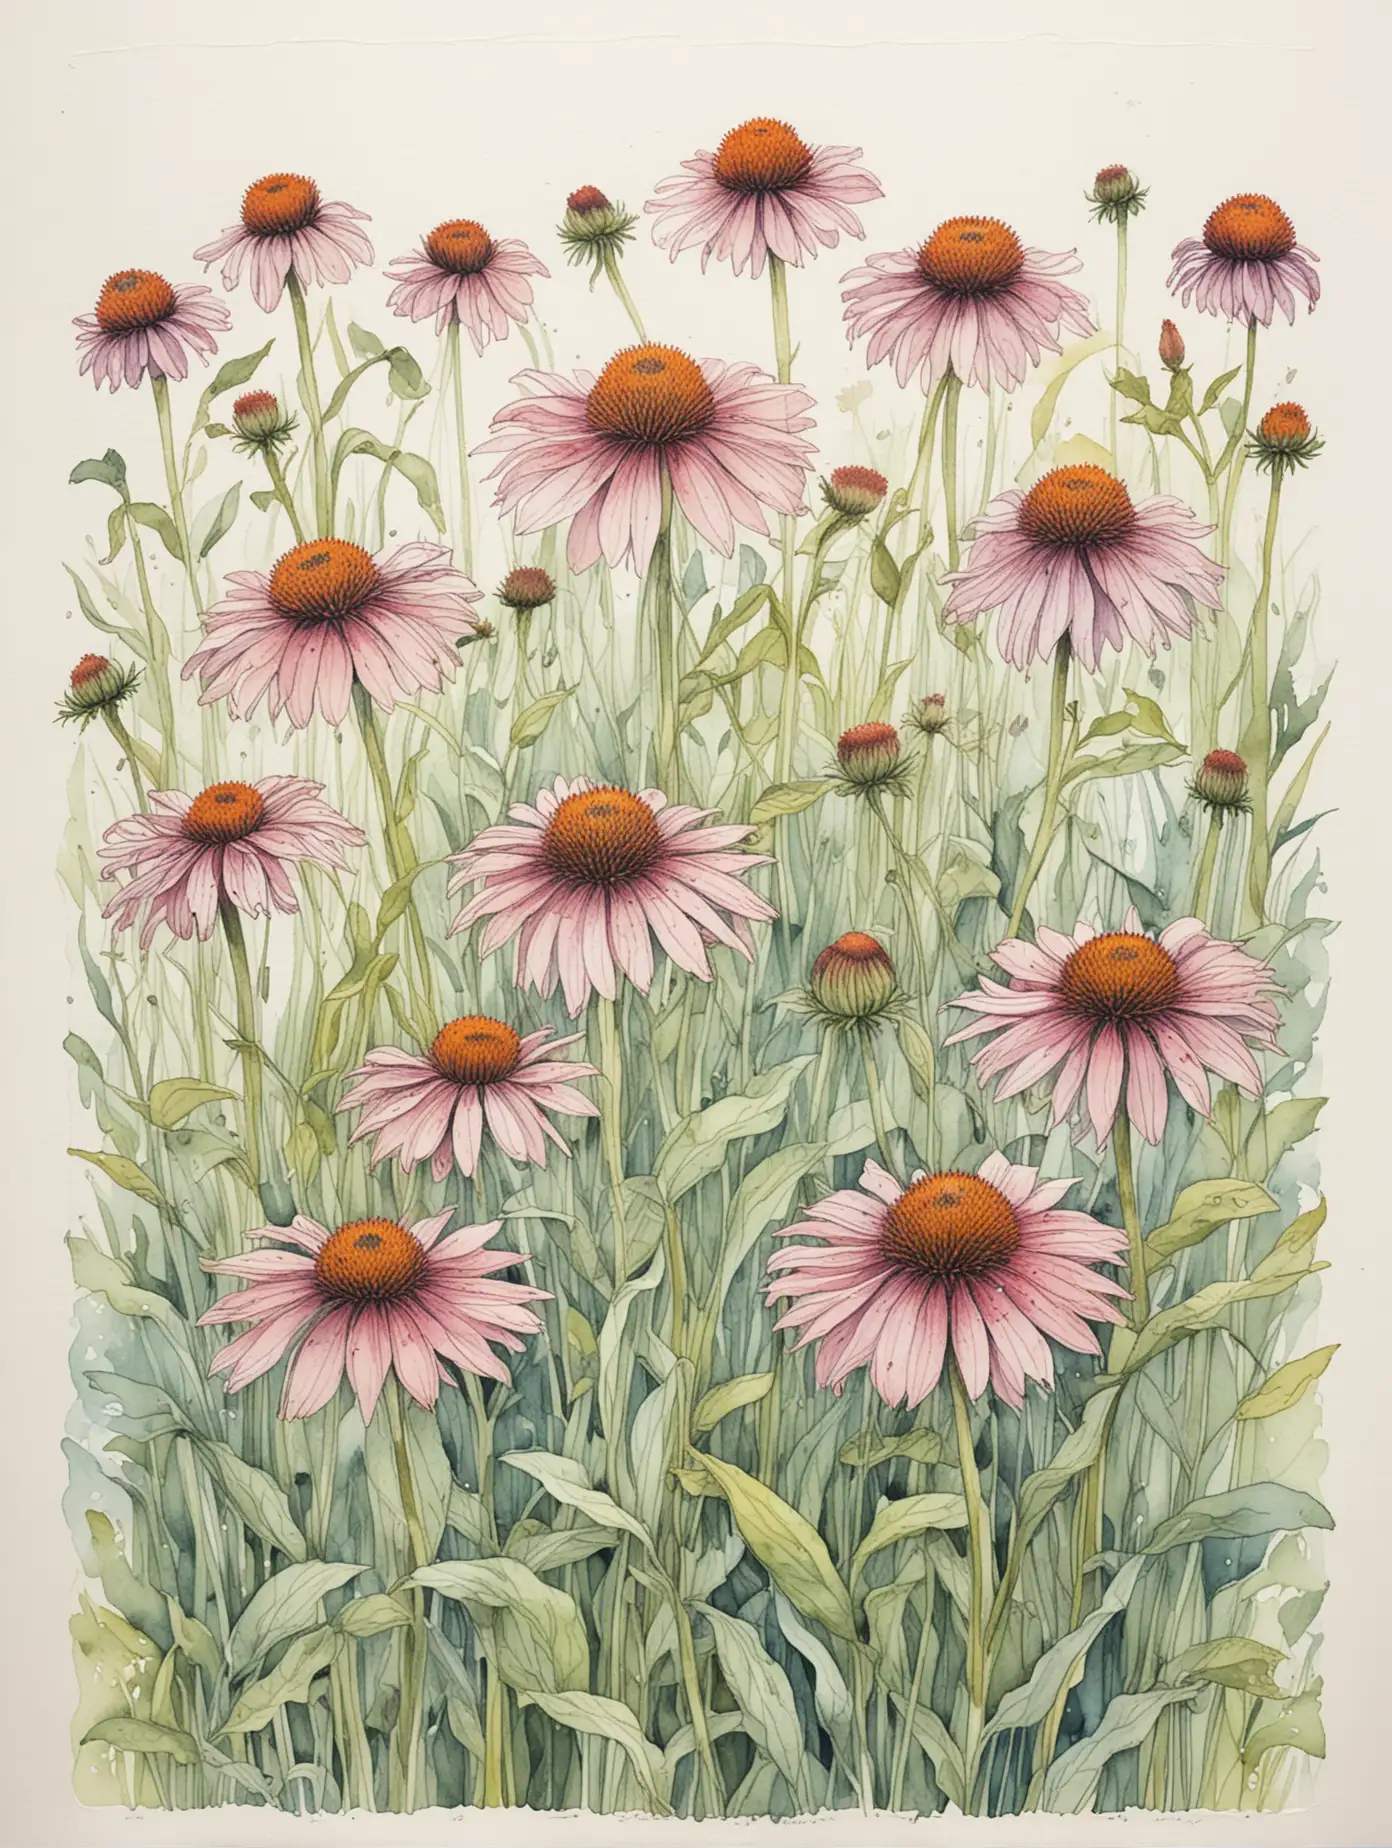 Tranquil Watercolor Illustration of Echinacea Field